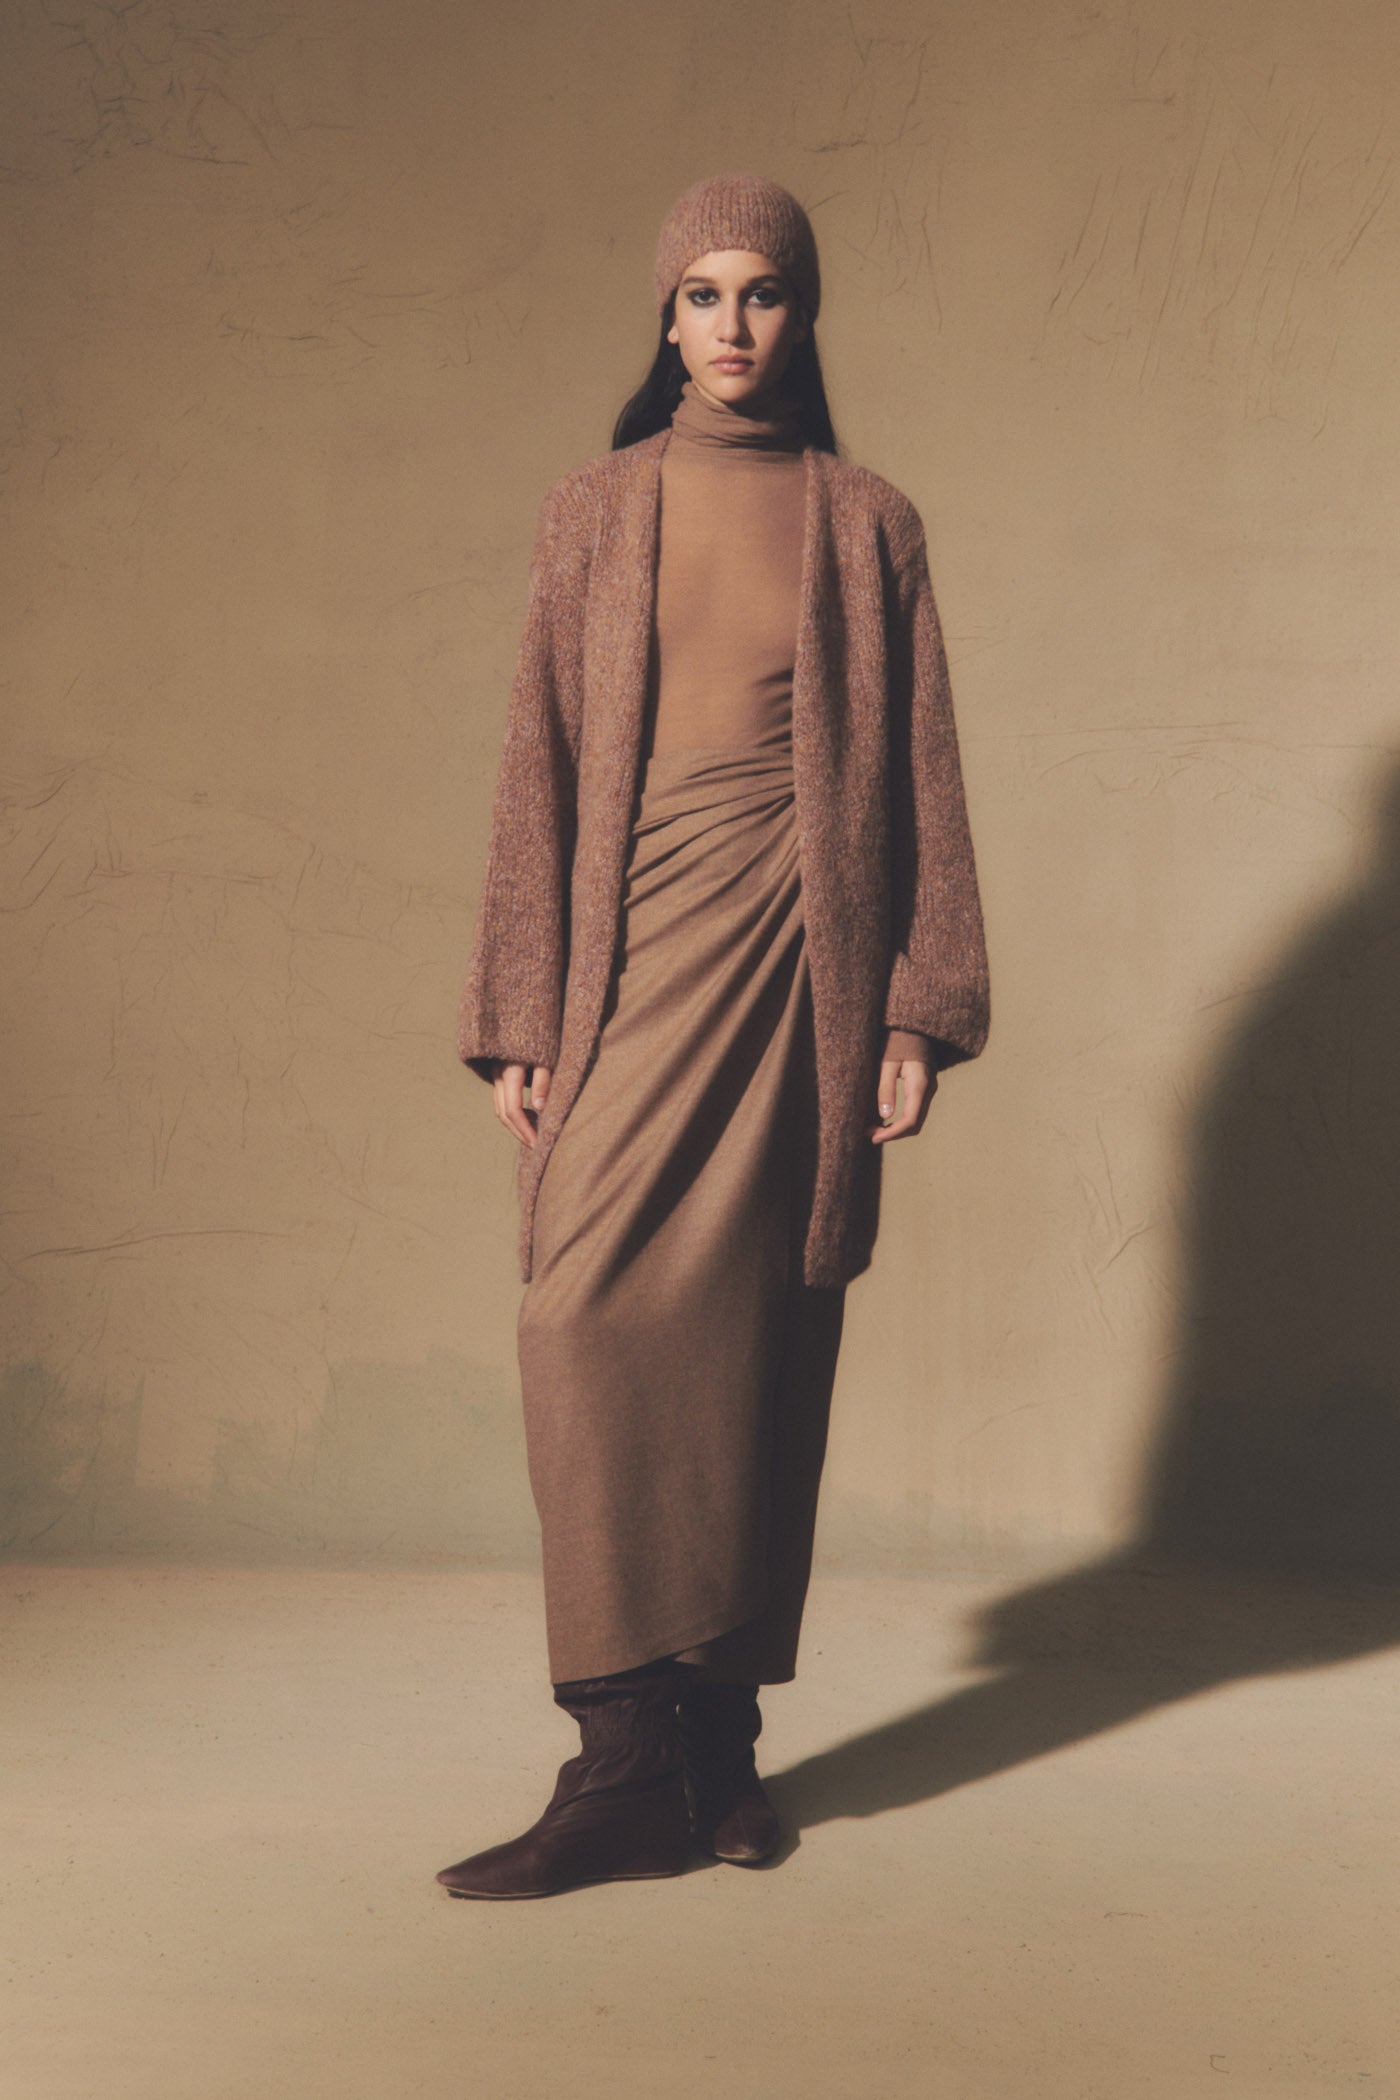 Lanna, cappuccino skirt in virgin wool and cashmere